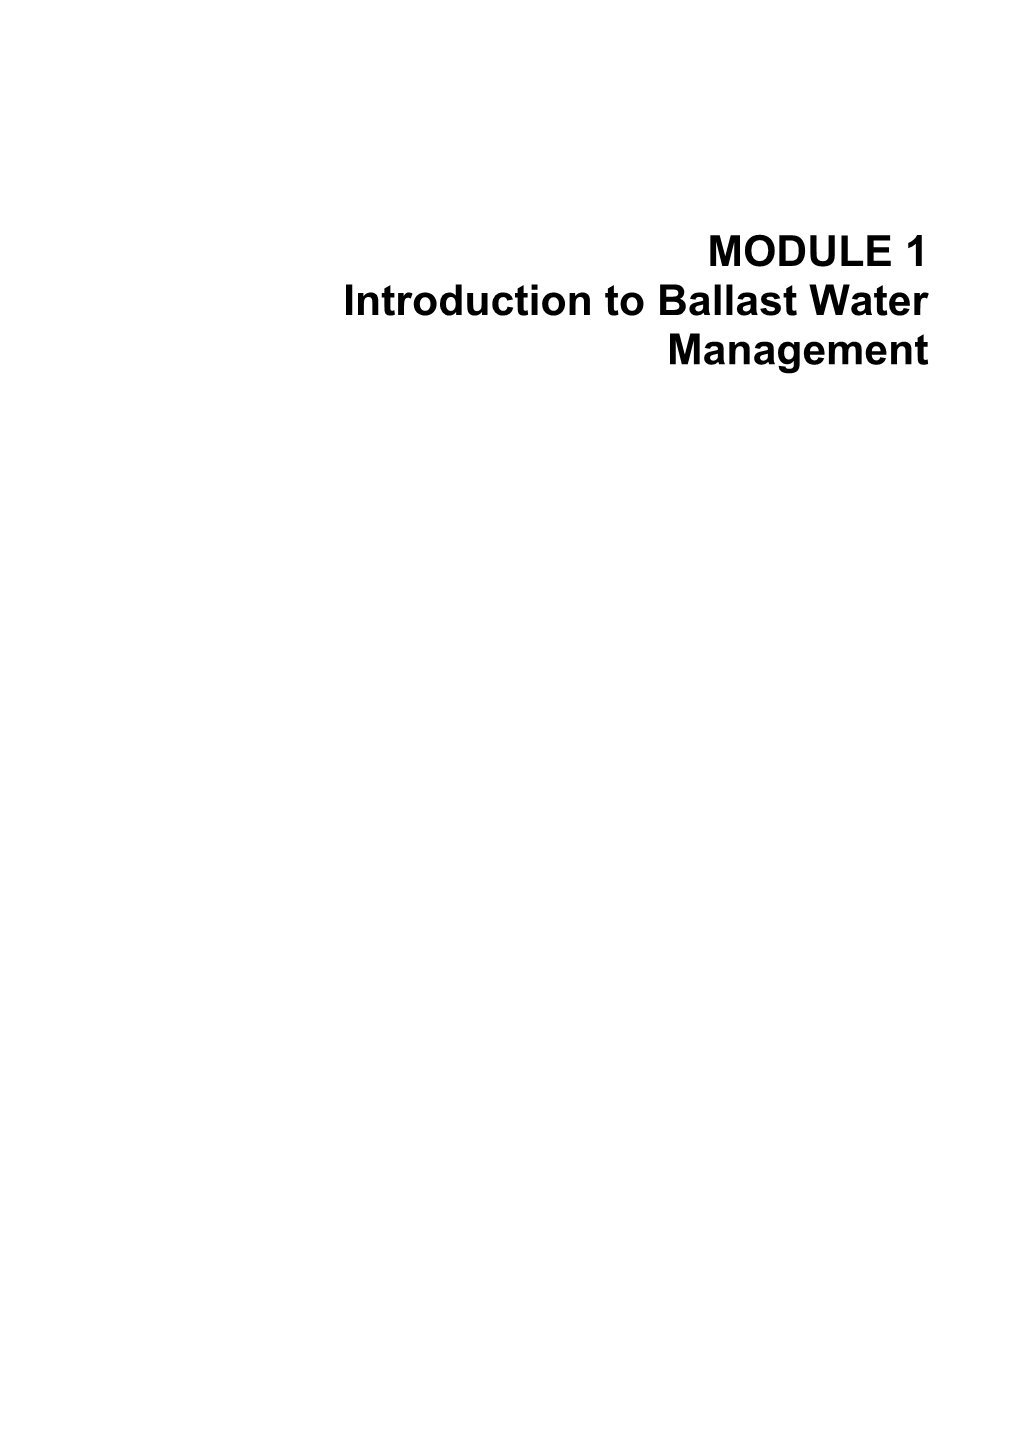 Module 1: Introduction to Bwm